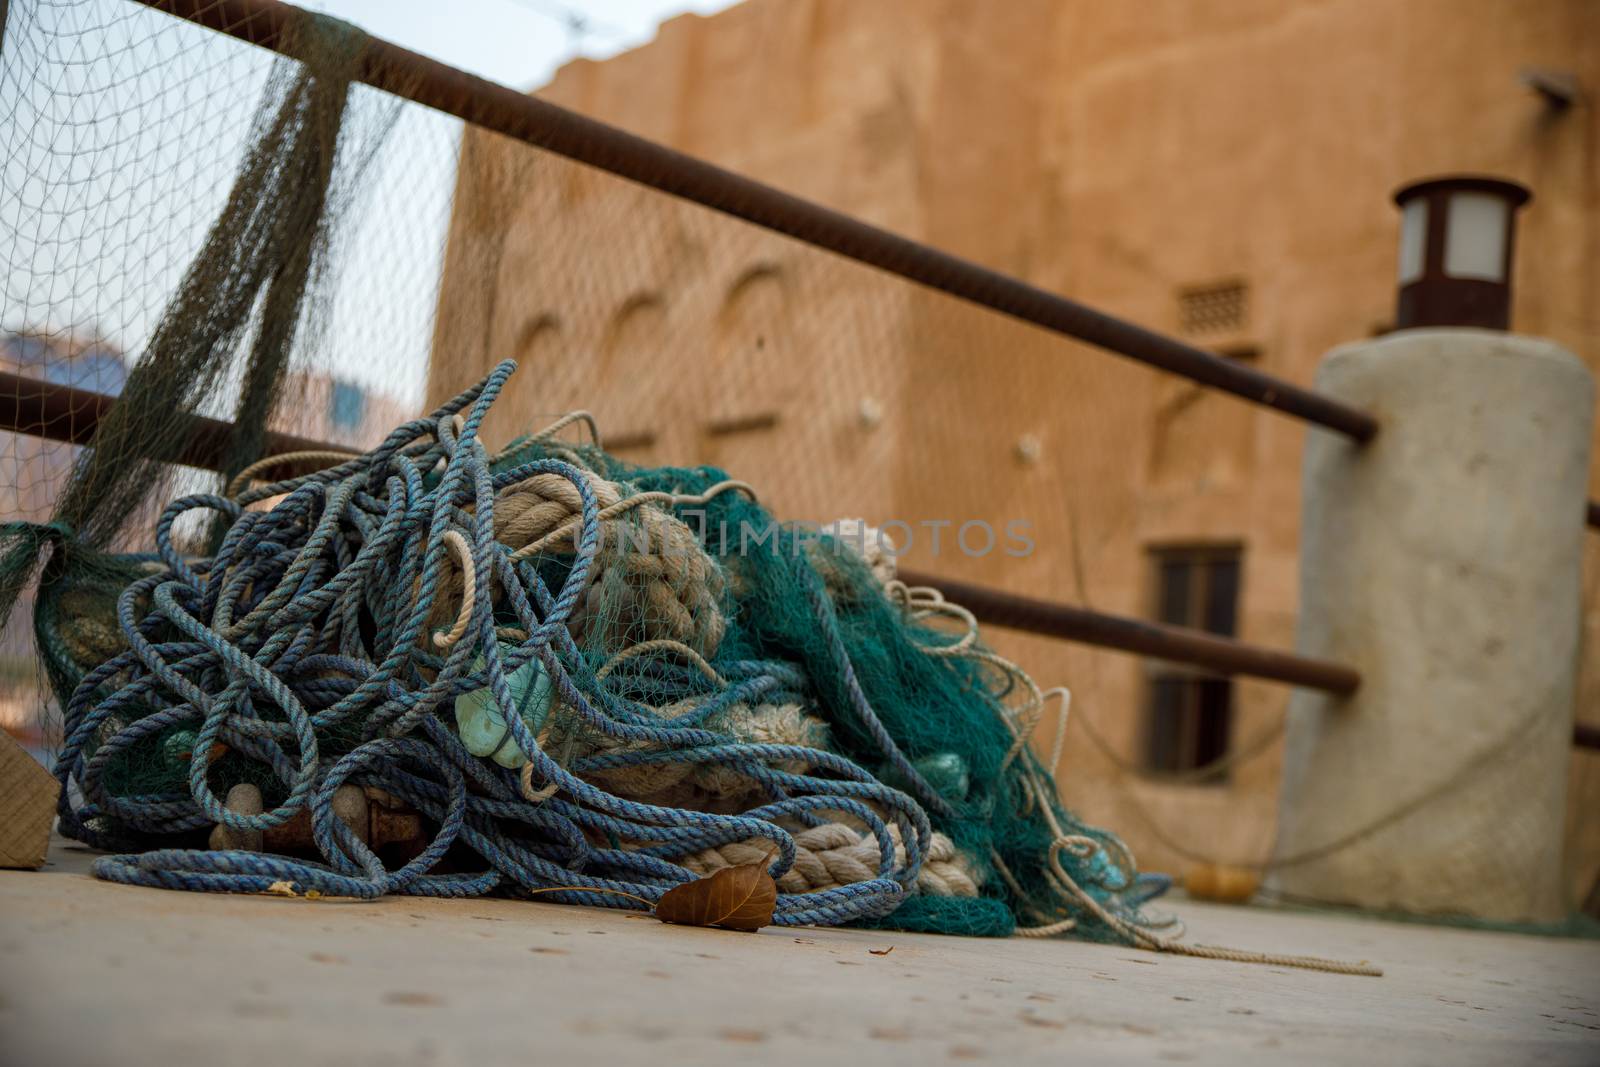 Fishing nets, buoys and floats on pavement not being used in old town Dubai by dugulan